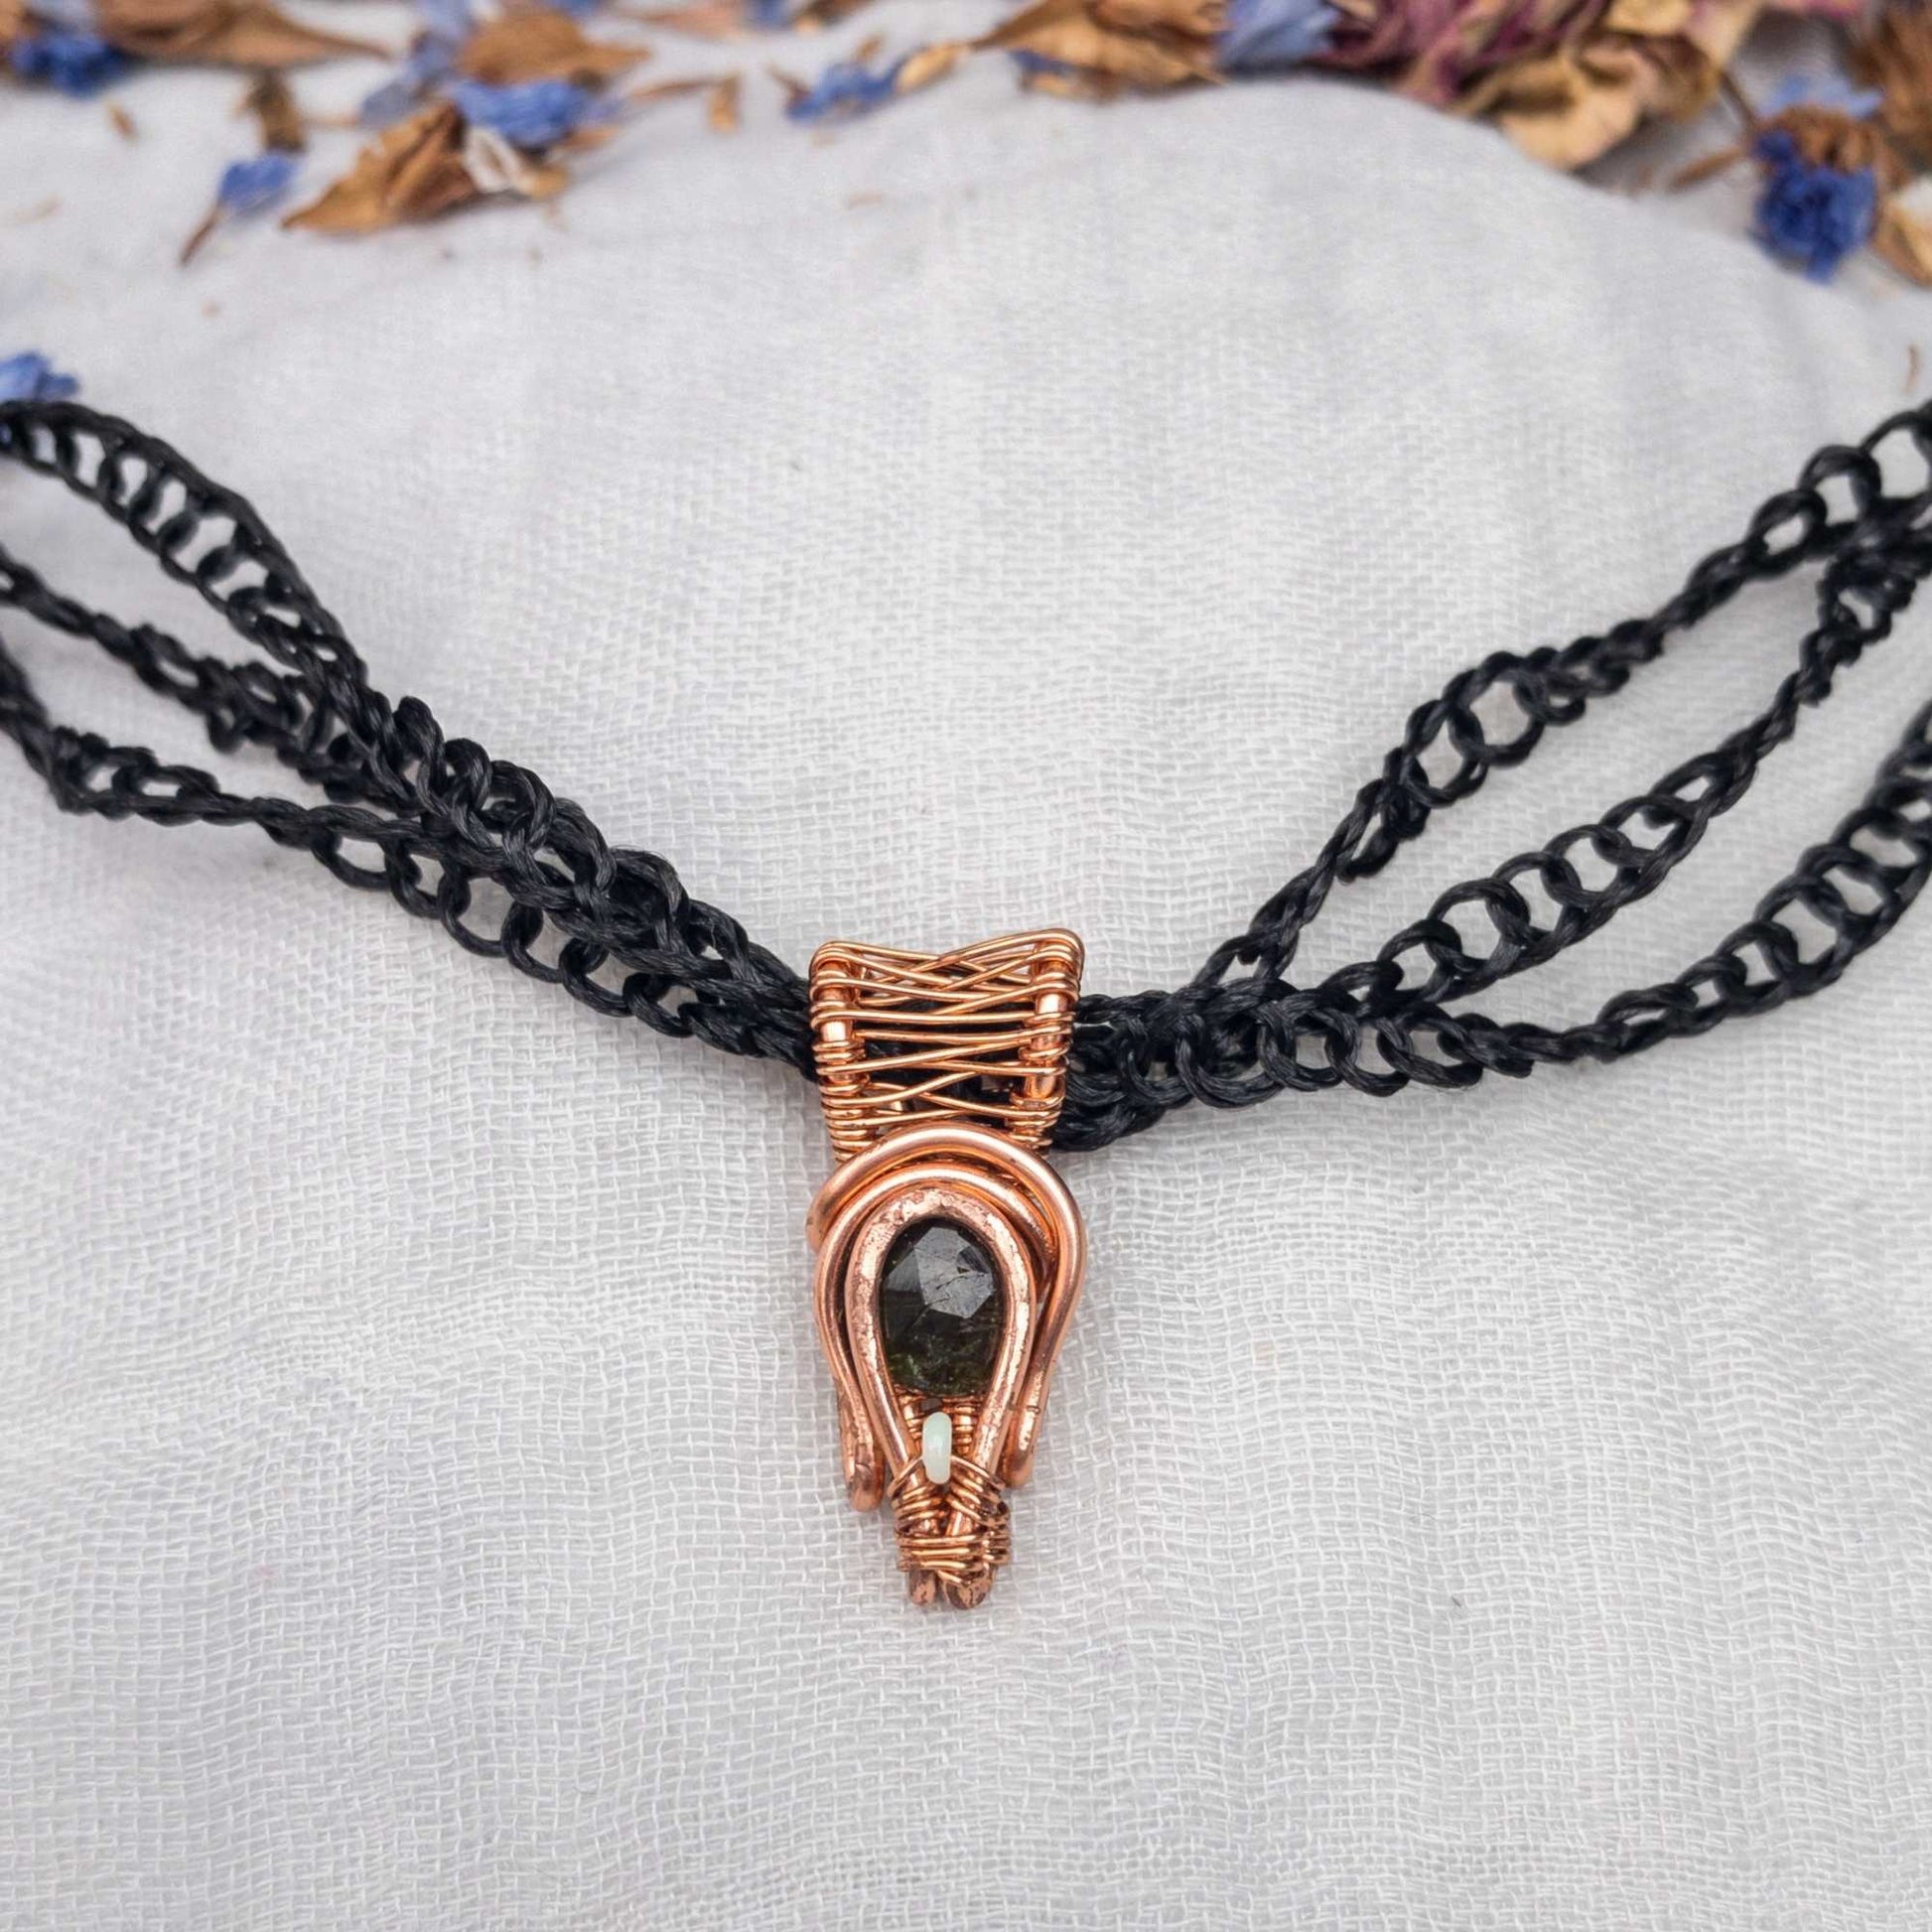 deep green tourmaline and opal wire wrapped pendant in copper wire example showing vegan silk cord chain